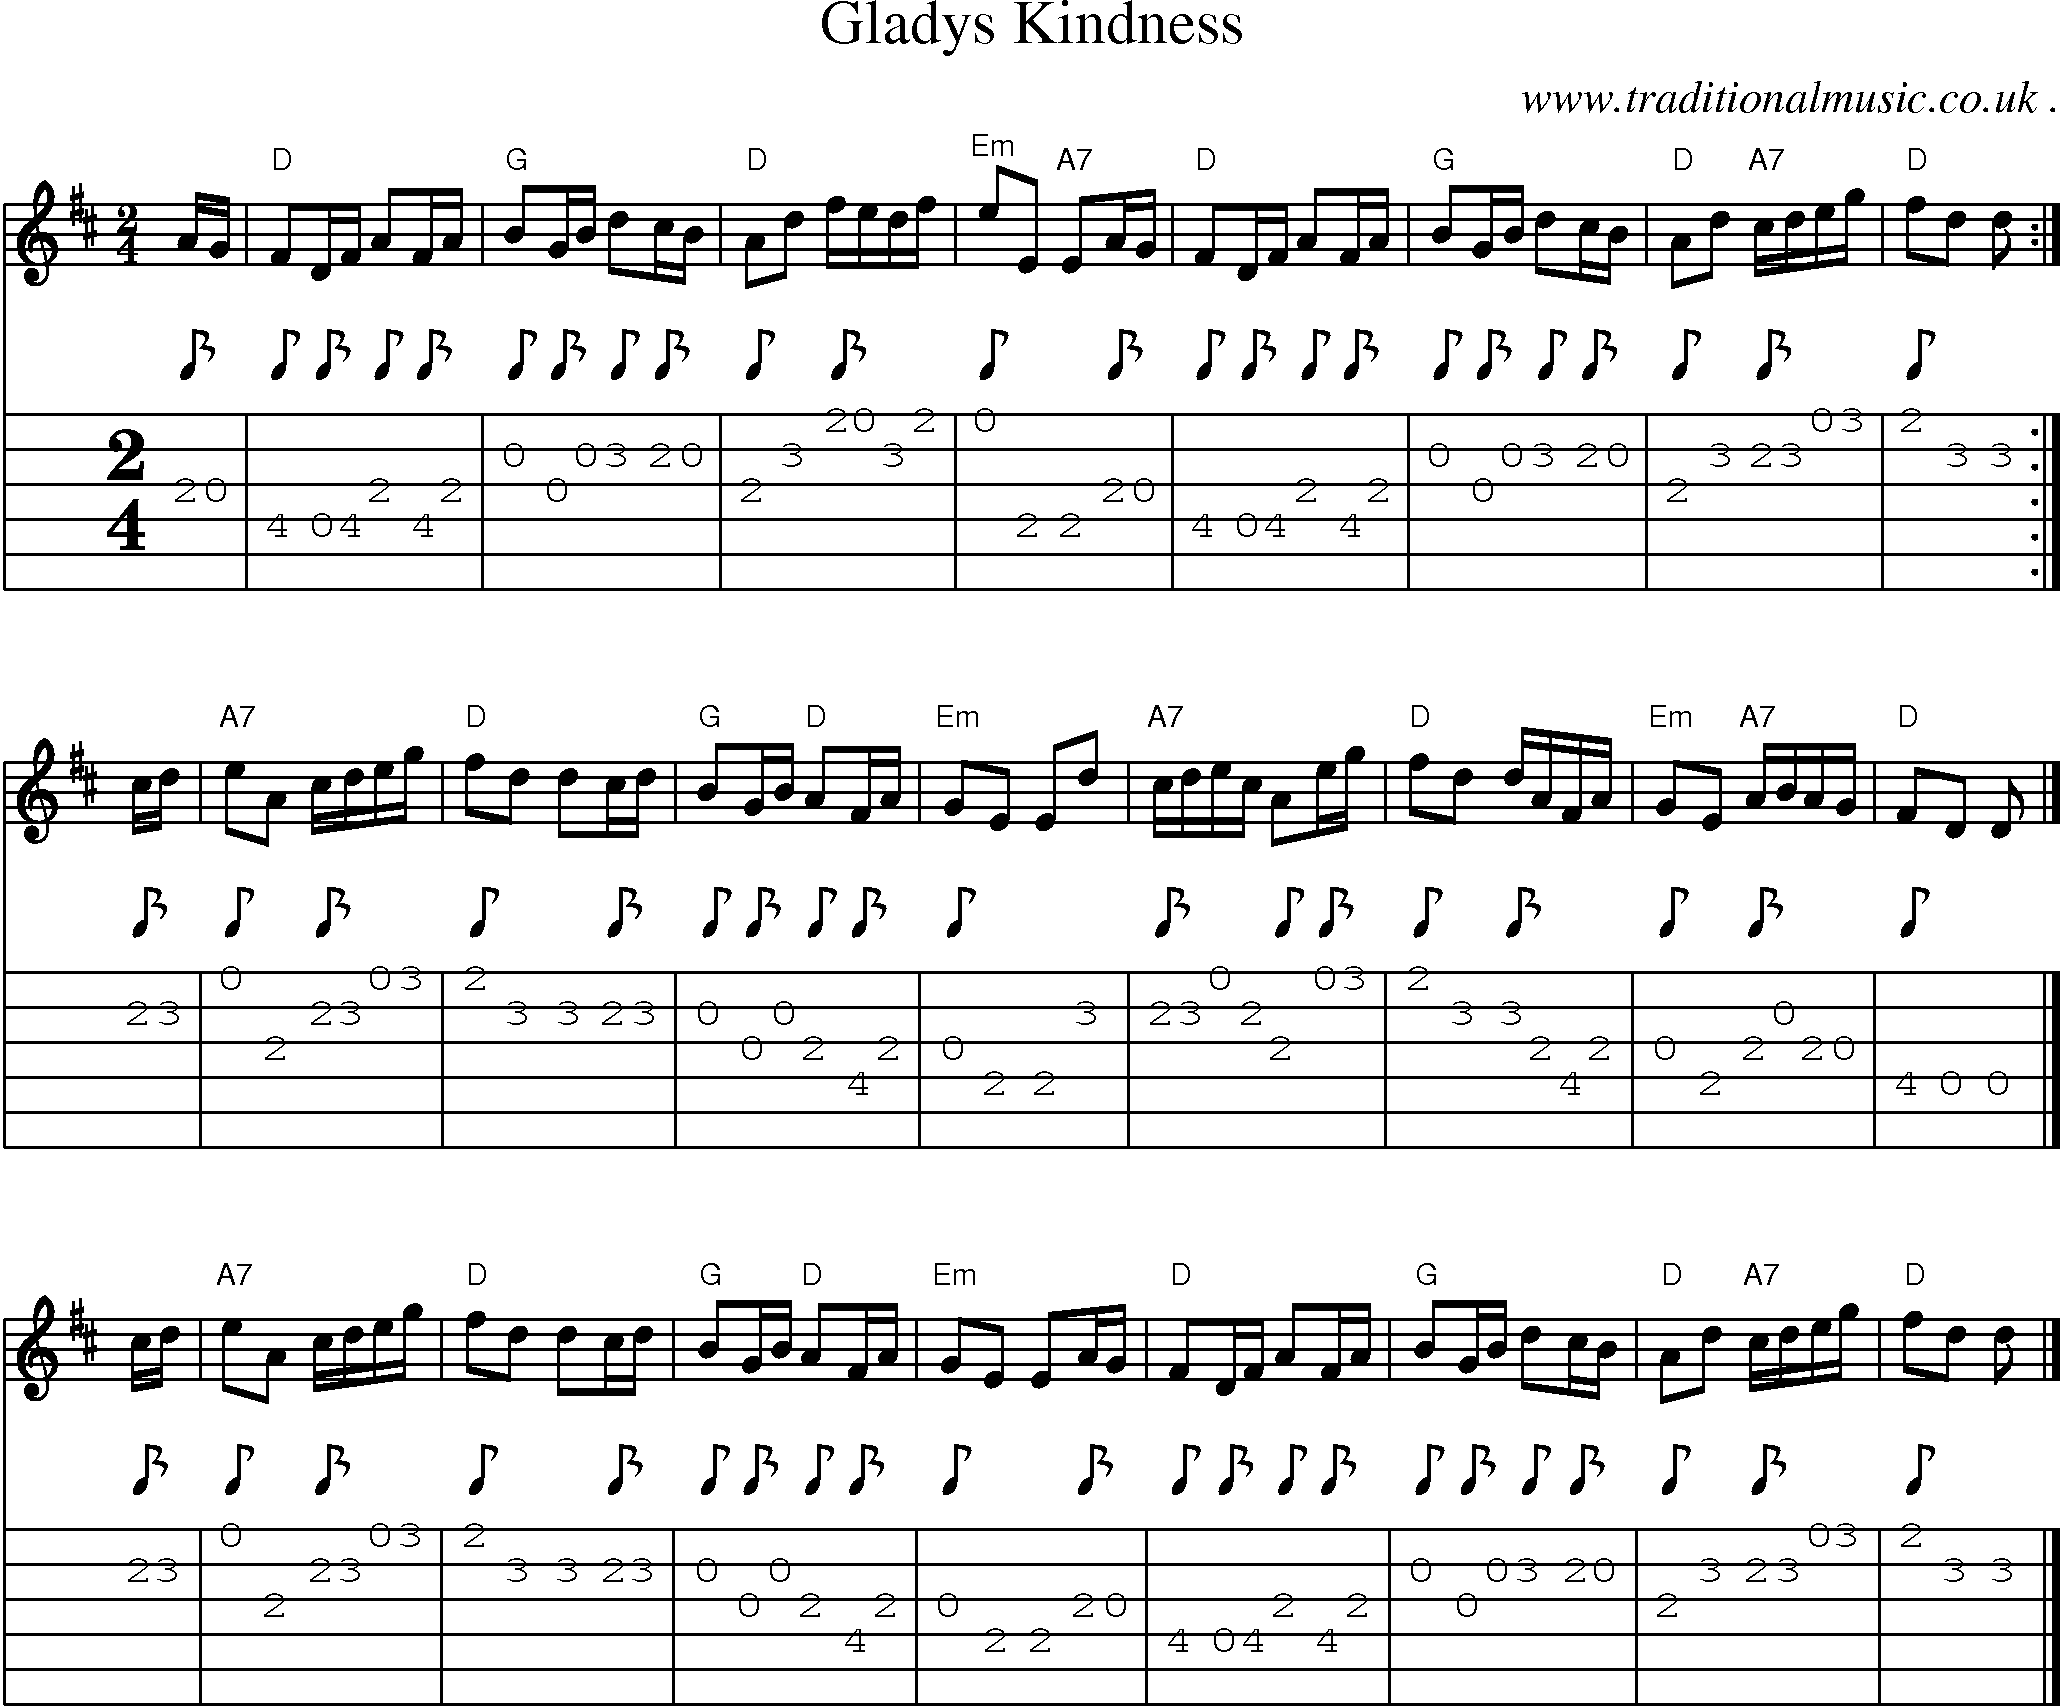 Sheet-music  score, Chords and Guitar Tabs for Gladys Kindness